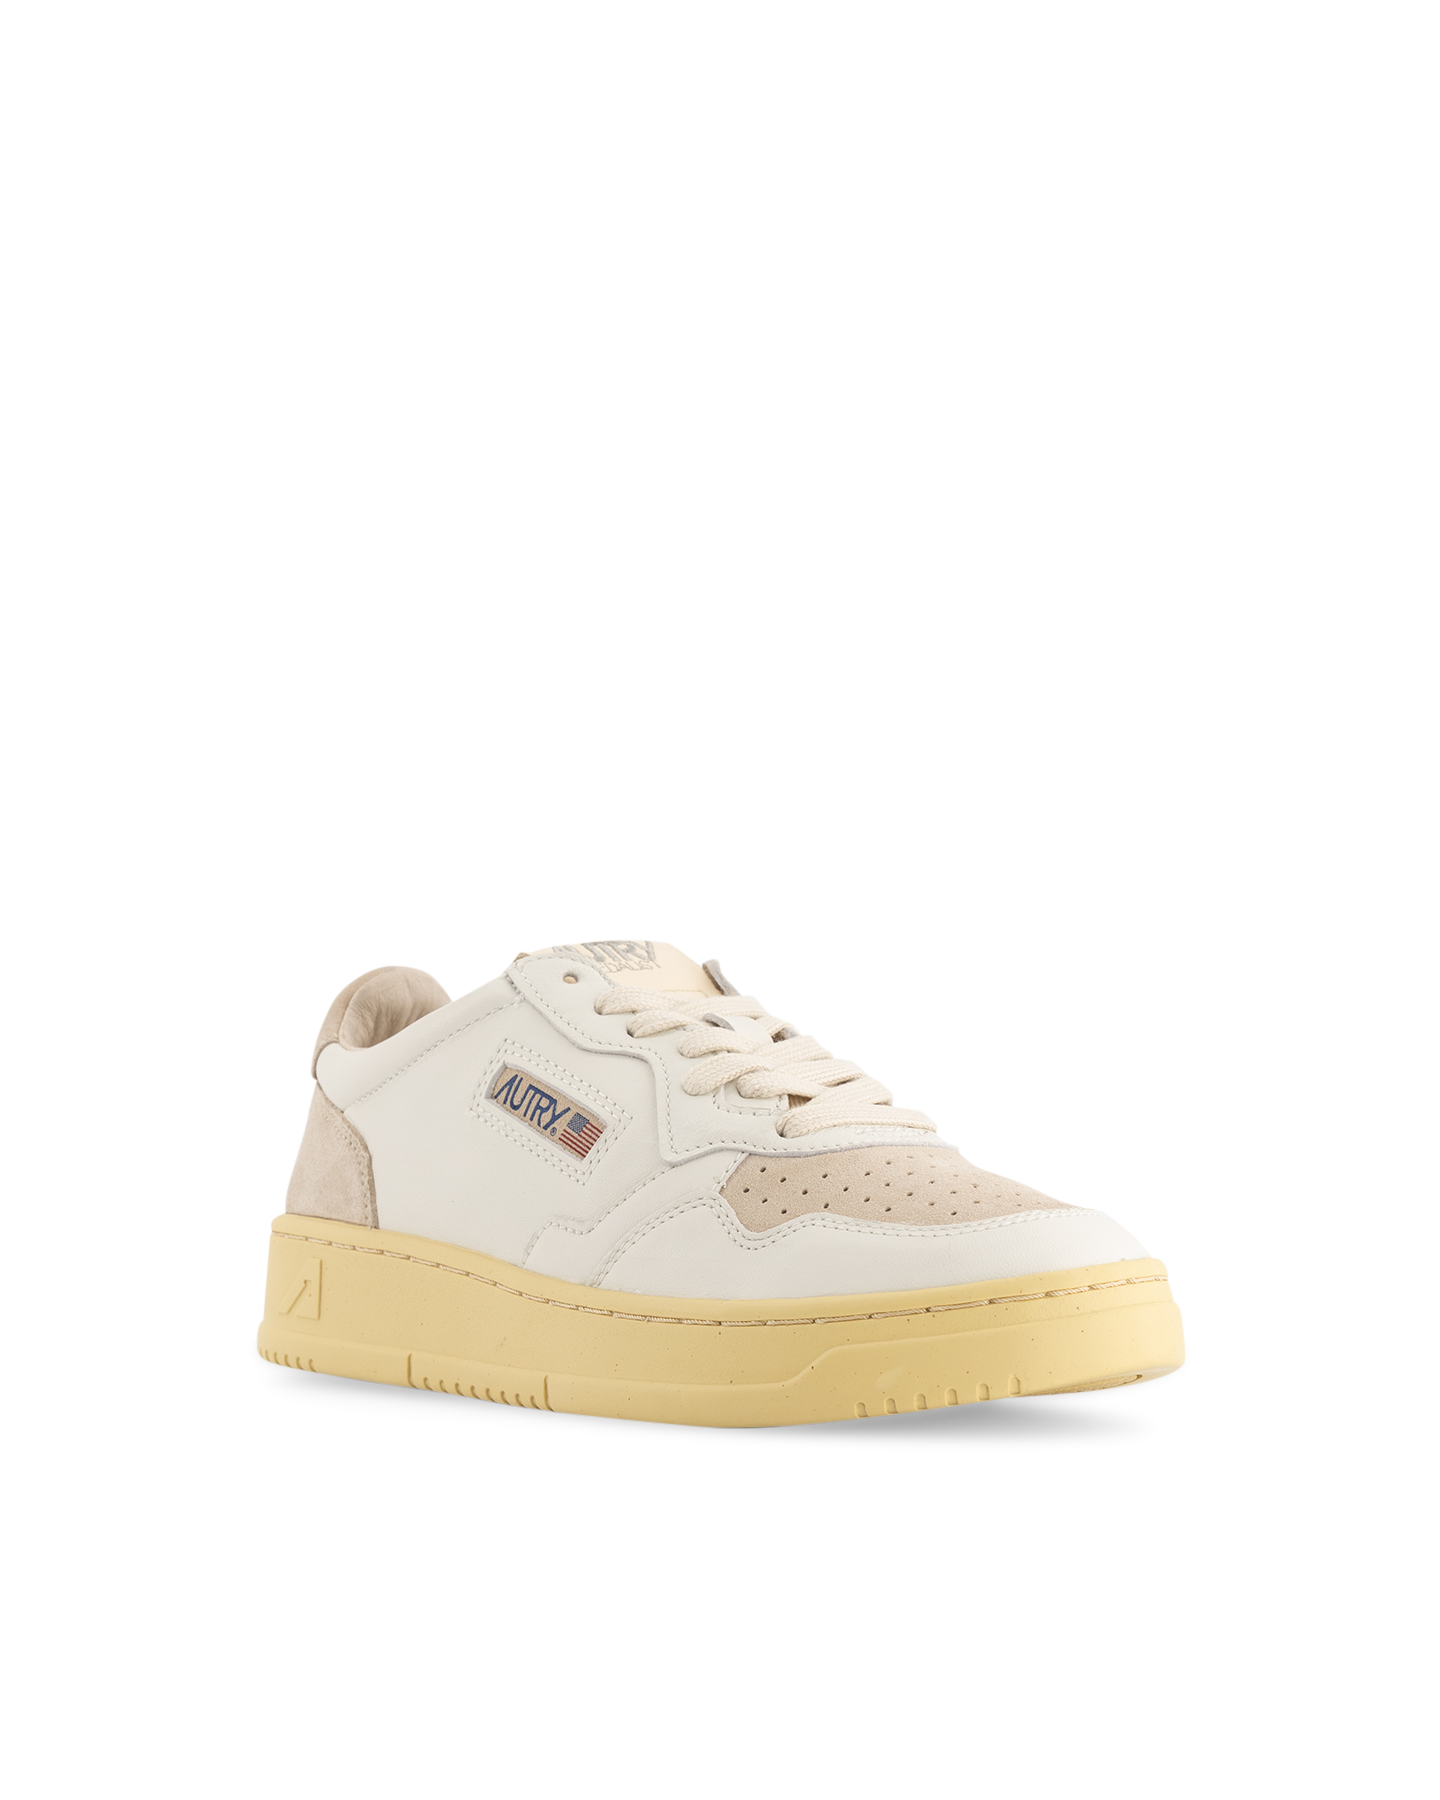 Autry Action Autry 01 Low Wom Suede/Leat Wht/Sand White 2